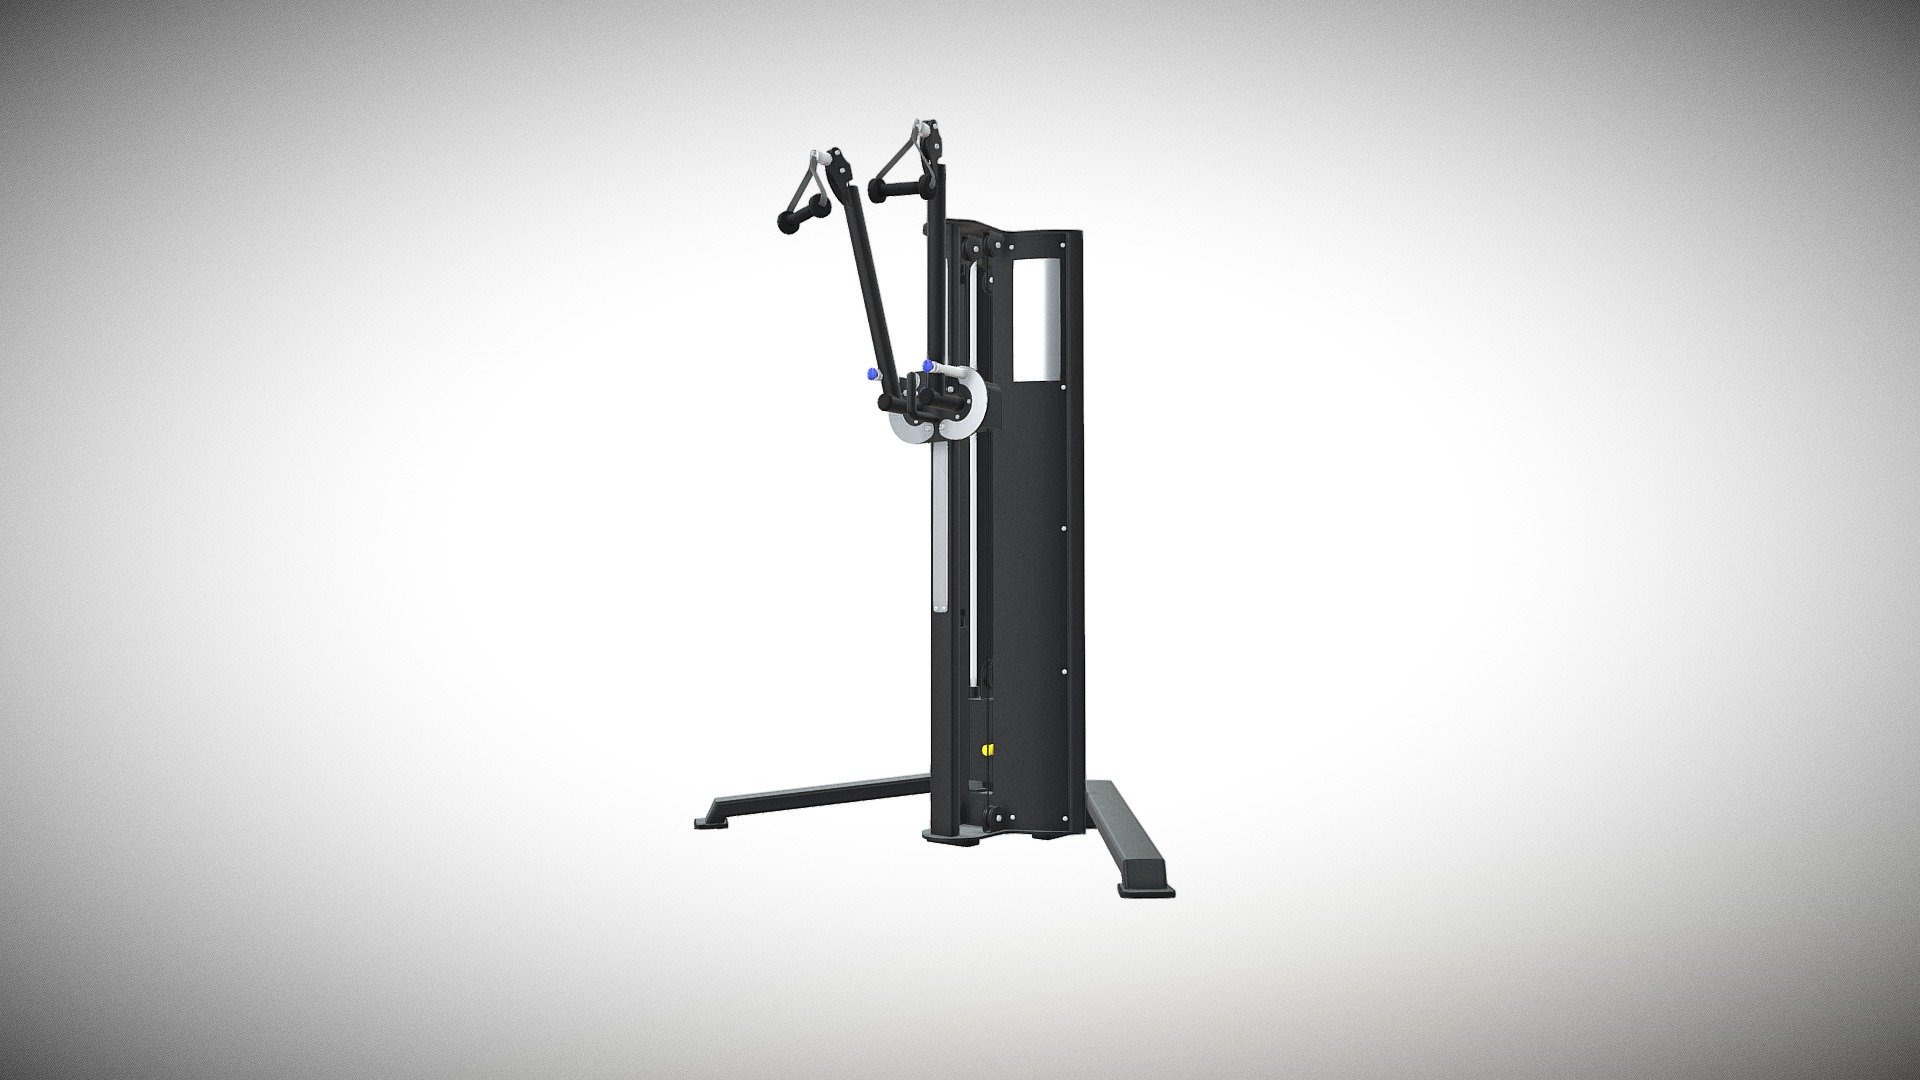 The product developed by an Italian designer offers high variability, so the two arms can each be adjusted separately 12 times in angle and together 11 times in height. As a result, the new device forms an enormous number of cable pulling exercises.

ATTENTION! Device must be fixed to the top of the wall or bolted to the floor!

http://dhz-fitness.de/en/dualcable - DUAL CABLE CROSS - 3D model by supersport-fitness 3d model